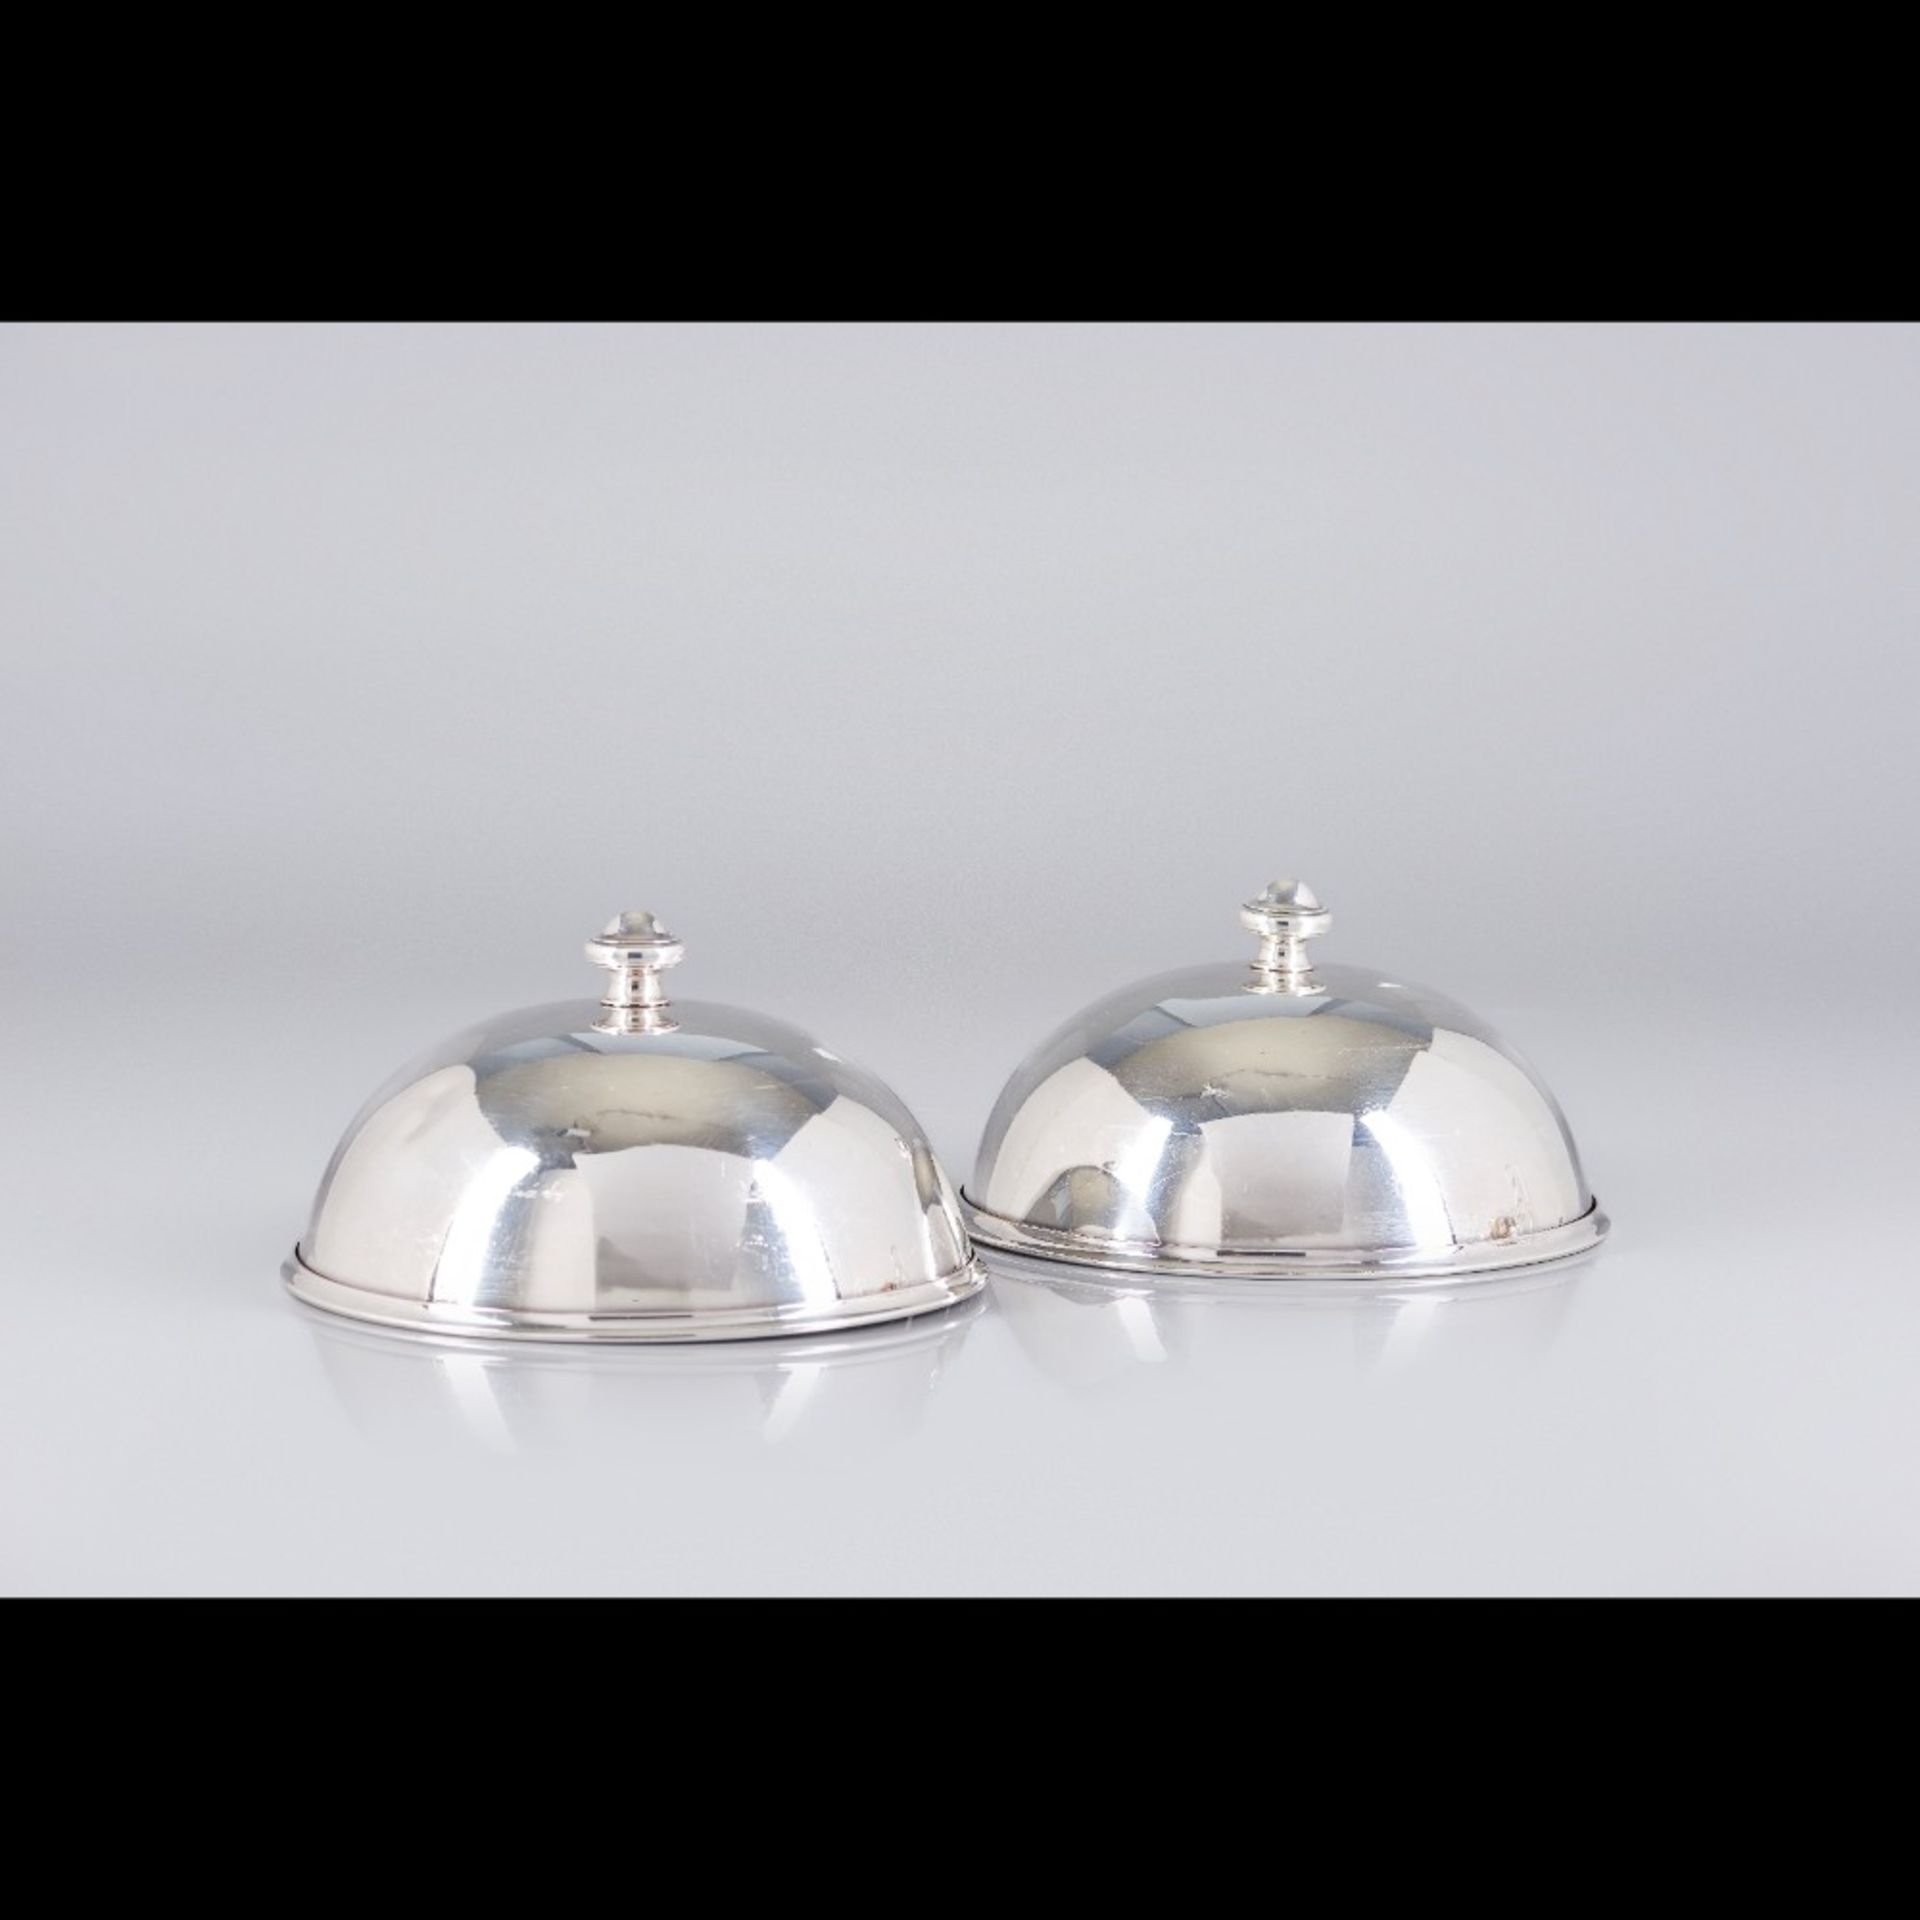  A set of two domes